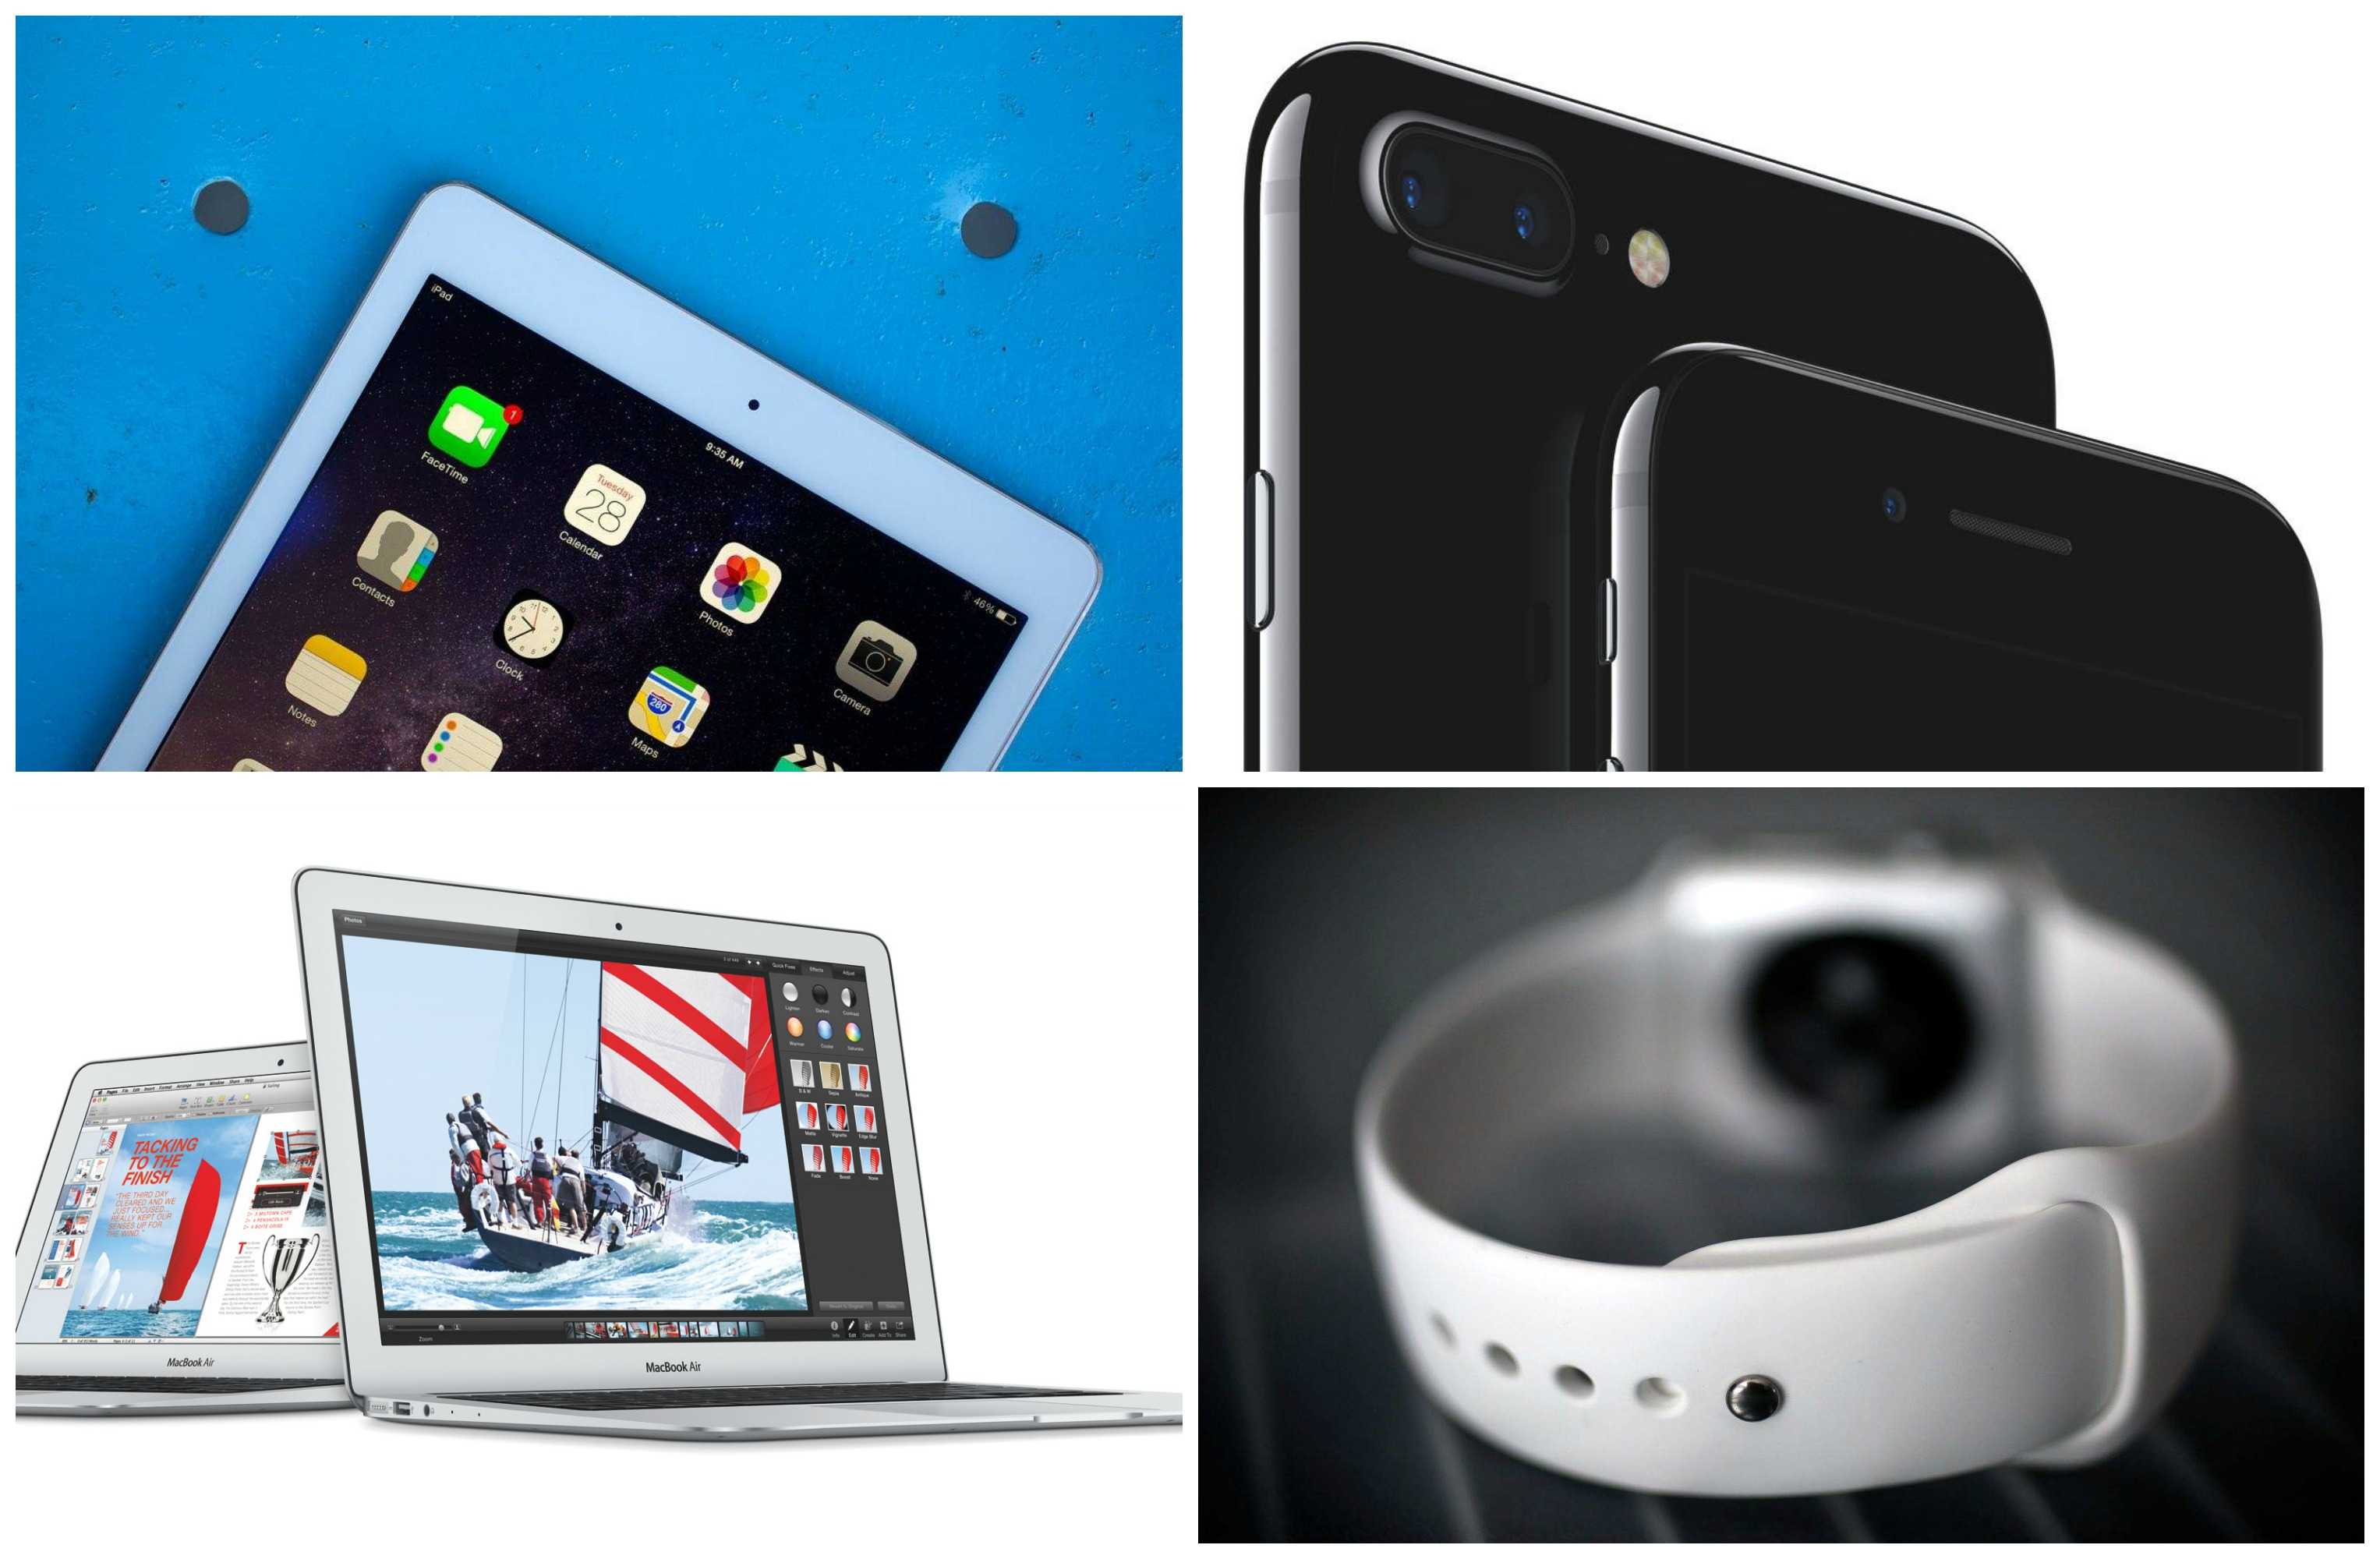 What kind of Apple deals can you expect to find on Black Friday 2016?